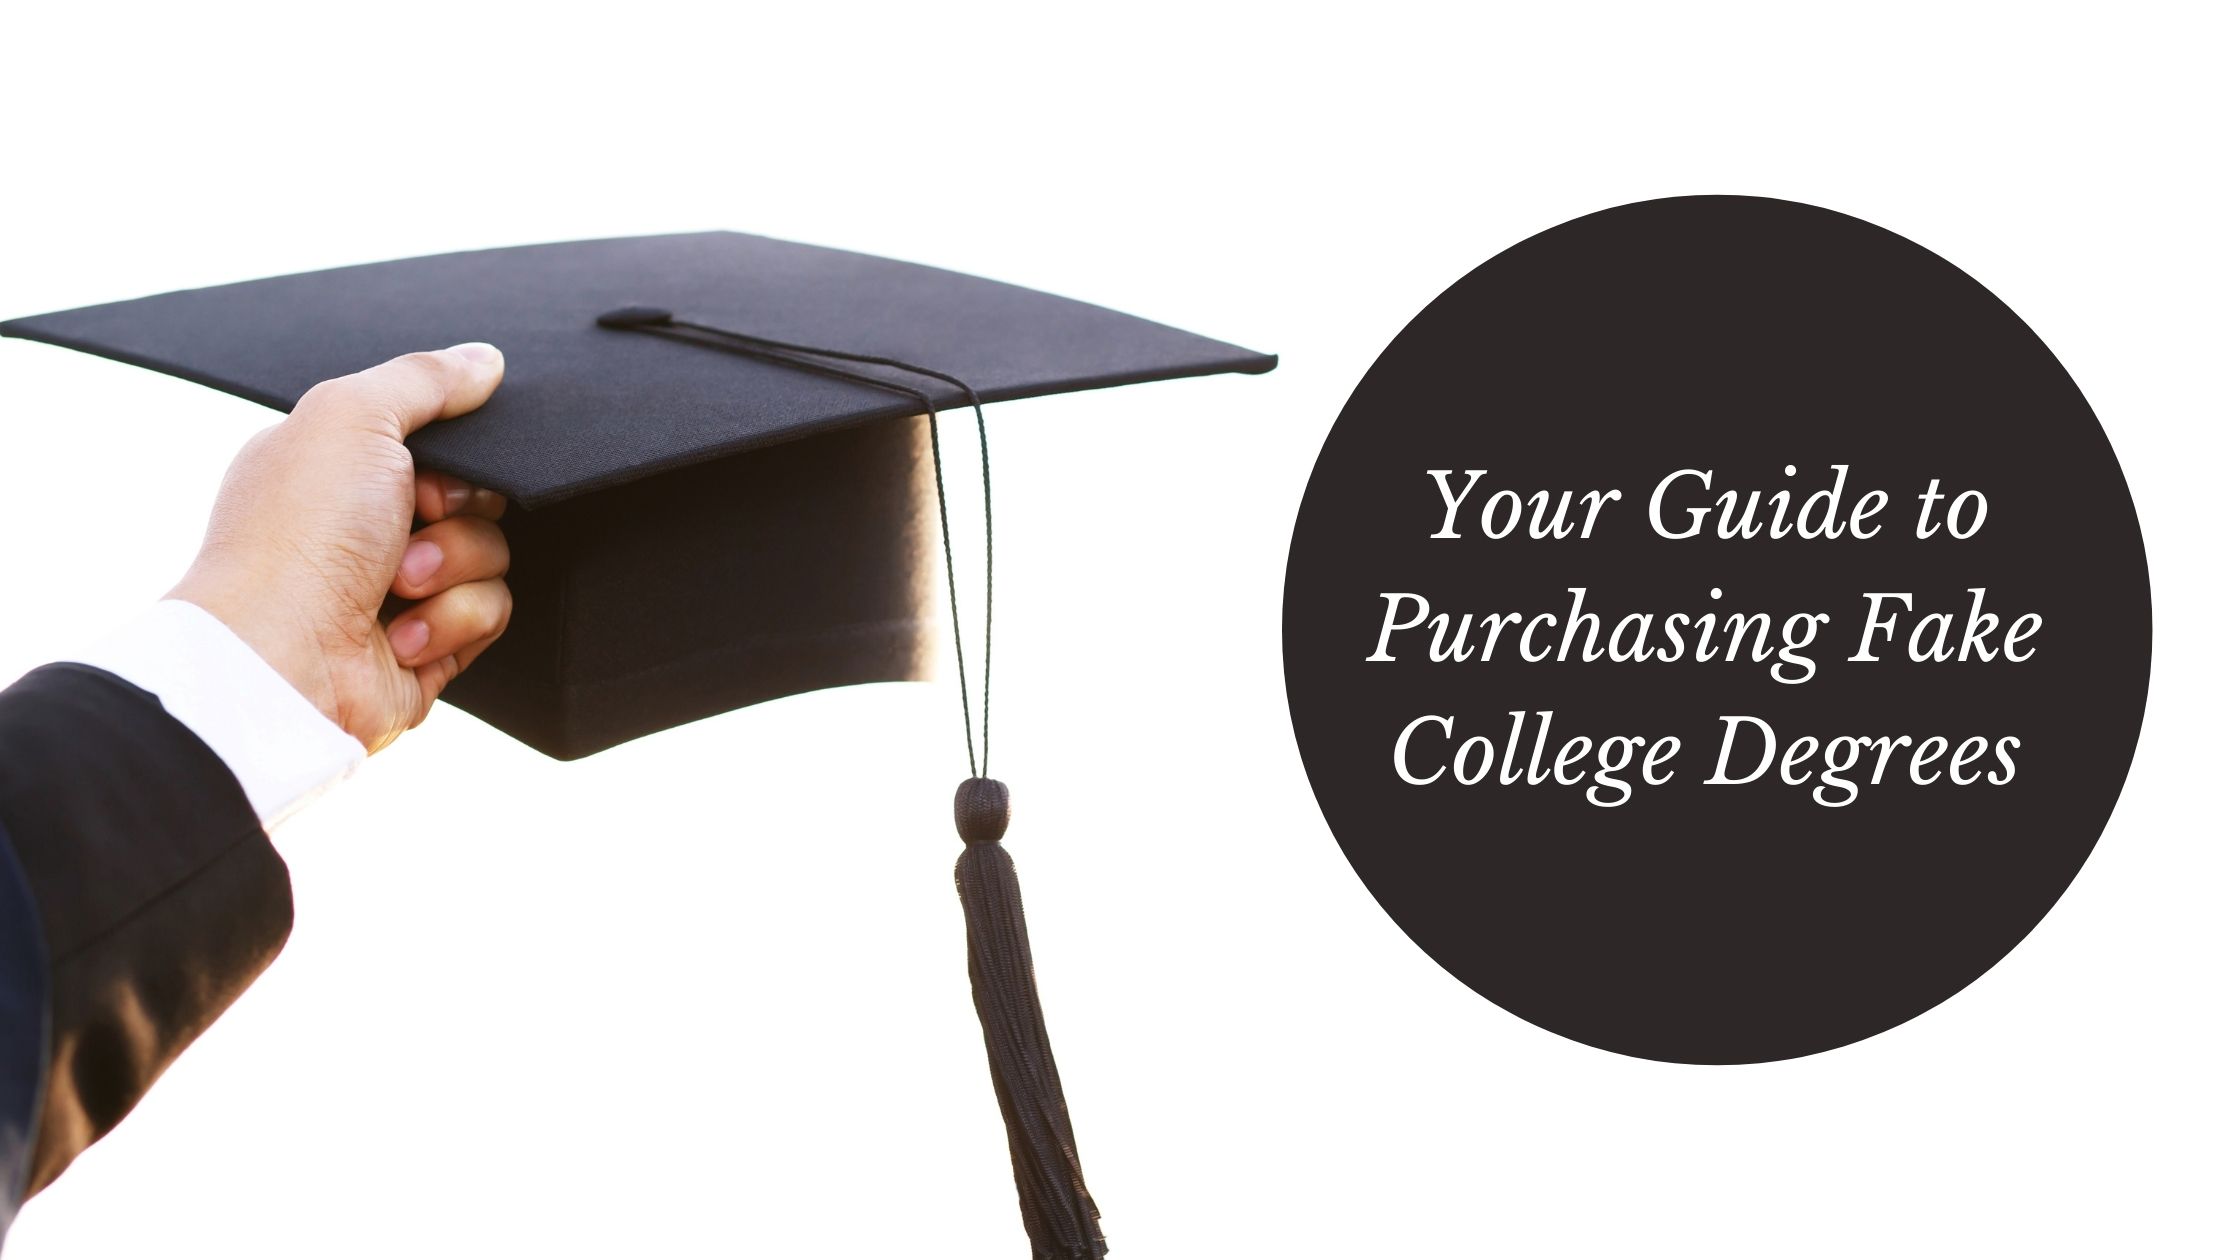 Your Guide to Purchasing Fake College Degrees